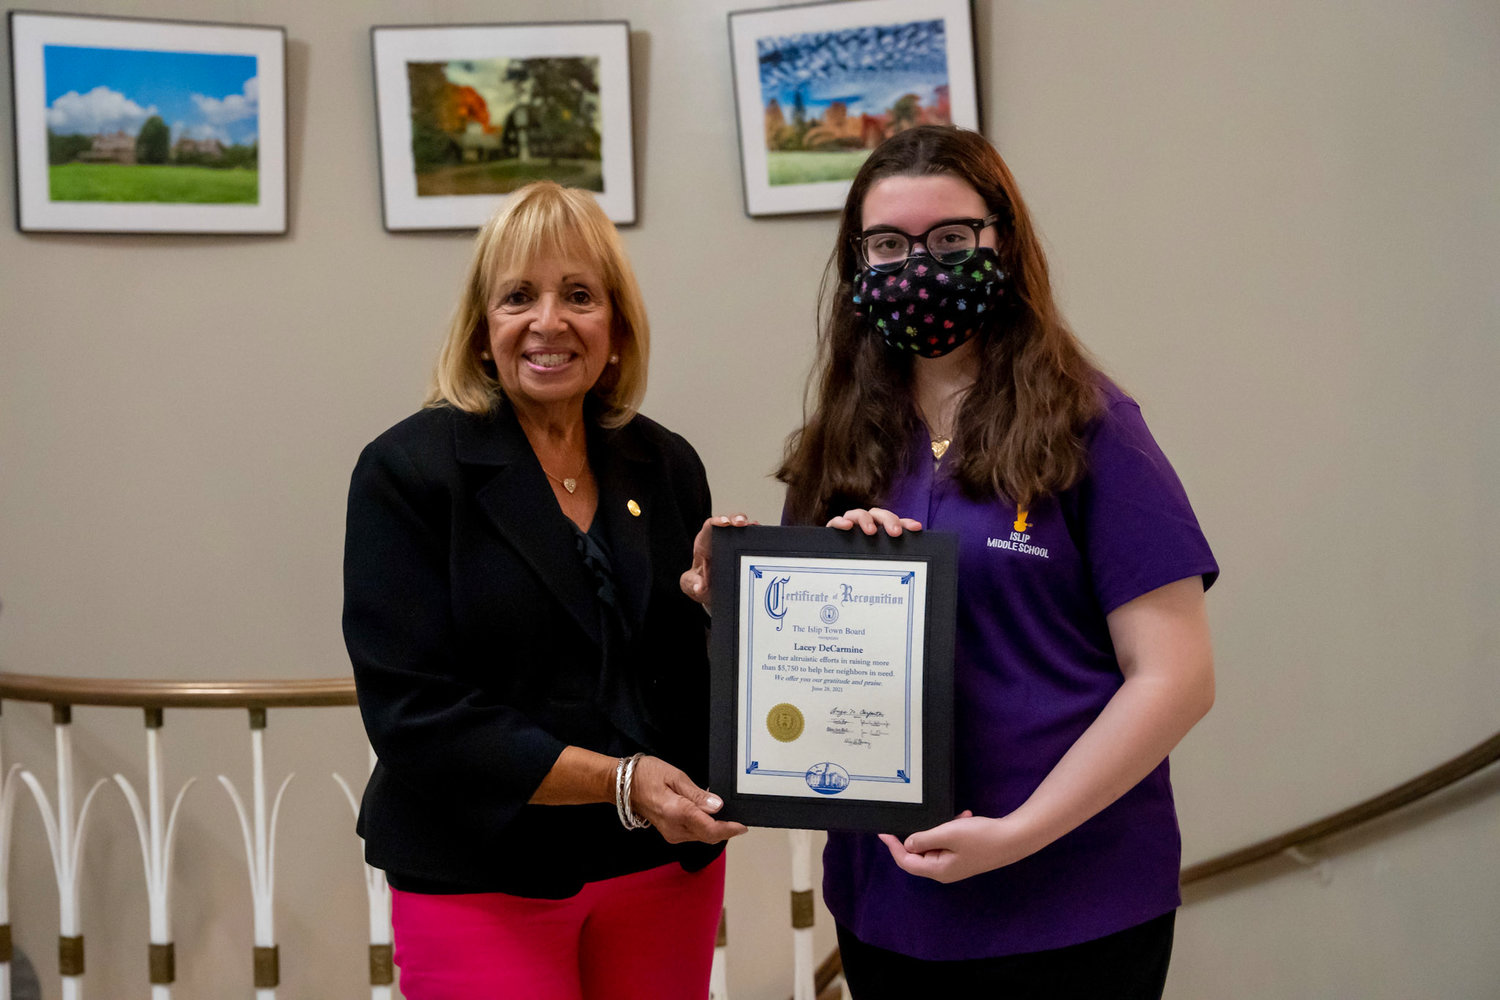 Lacey DeCarmine, a seventh grader at Islip Middle School, member of the National Junior Honor Society and a Girl Scout since kindergarten, was recently honored by supervisor Angie Carpenter at Islip Town Hall.